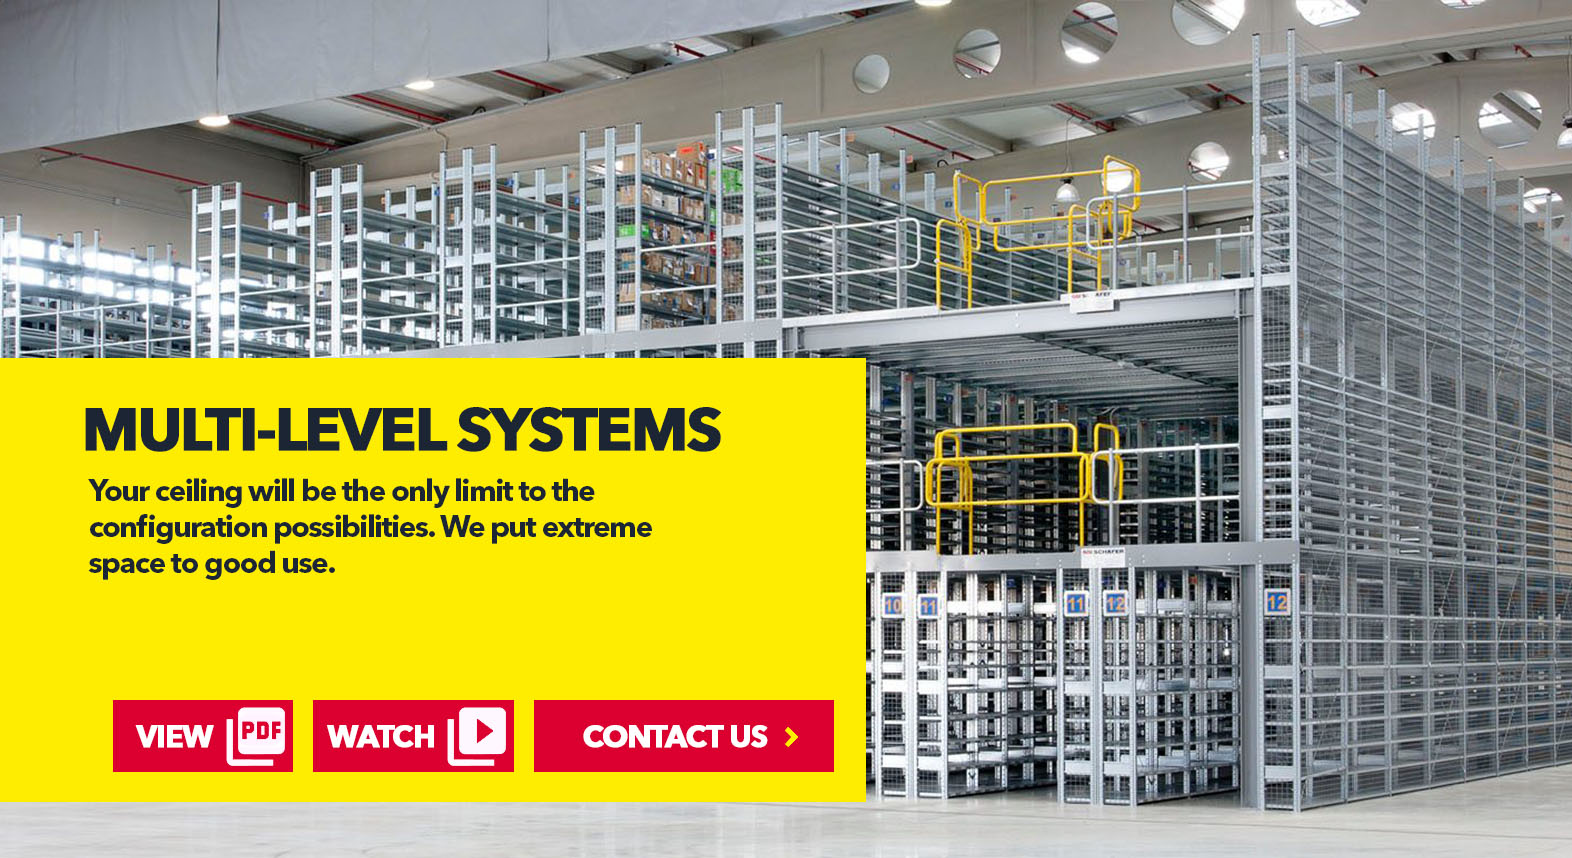 Multi-Level Shelving Systems by SSI Schaefer USA. Download PDF. Watch Video. Contact Us. www.chaefershelving.com